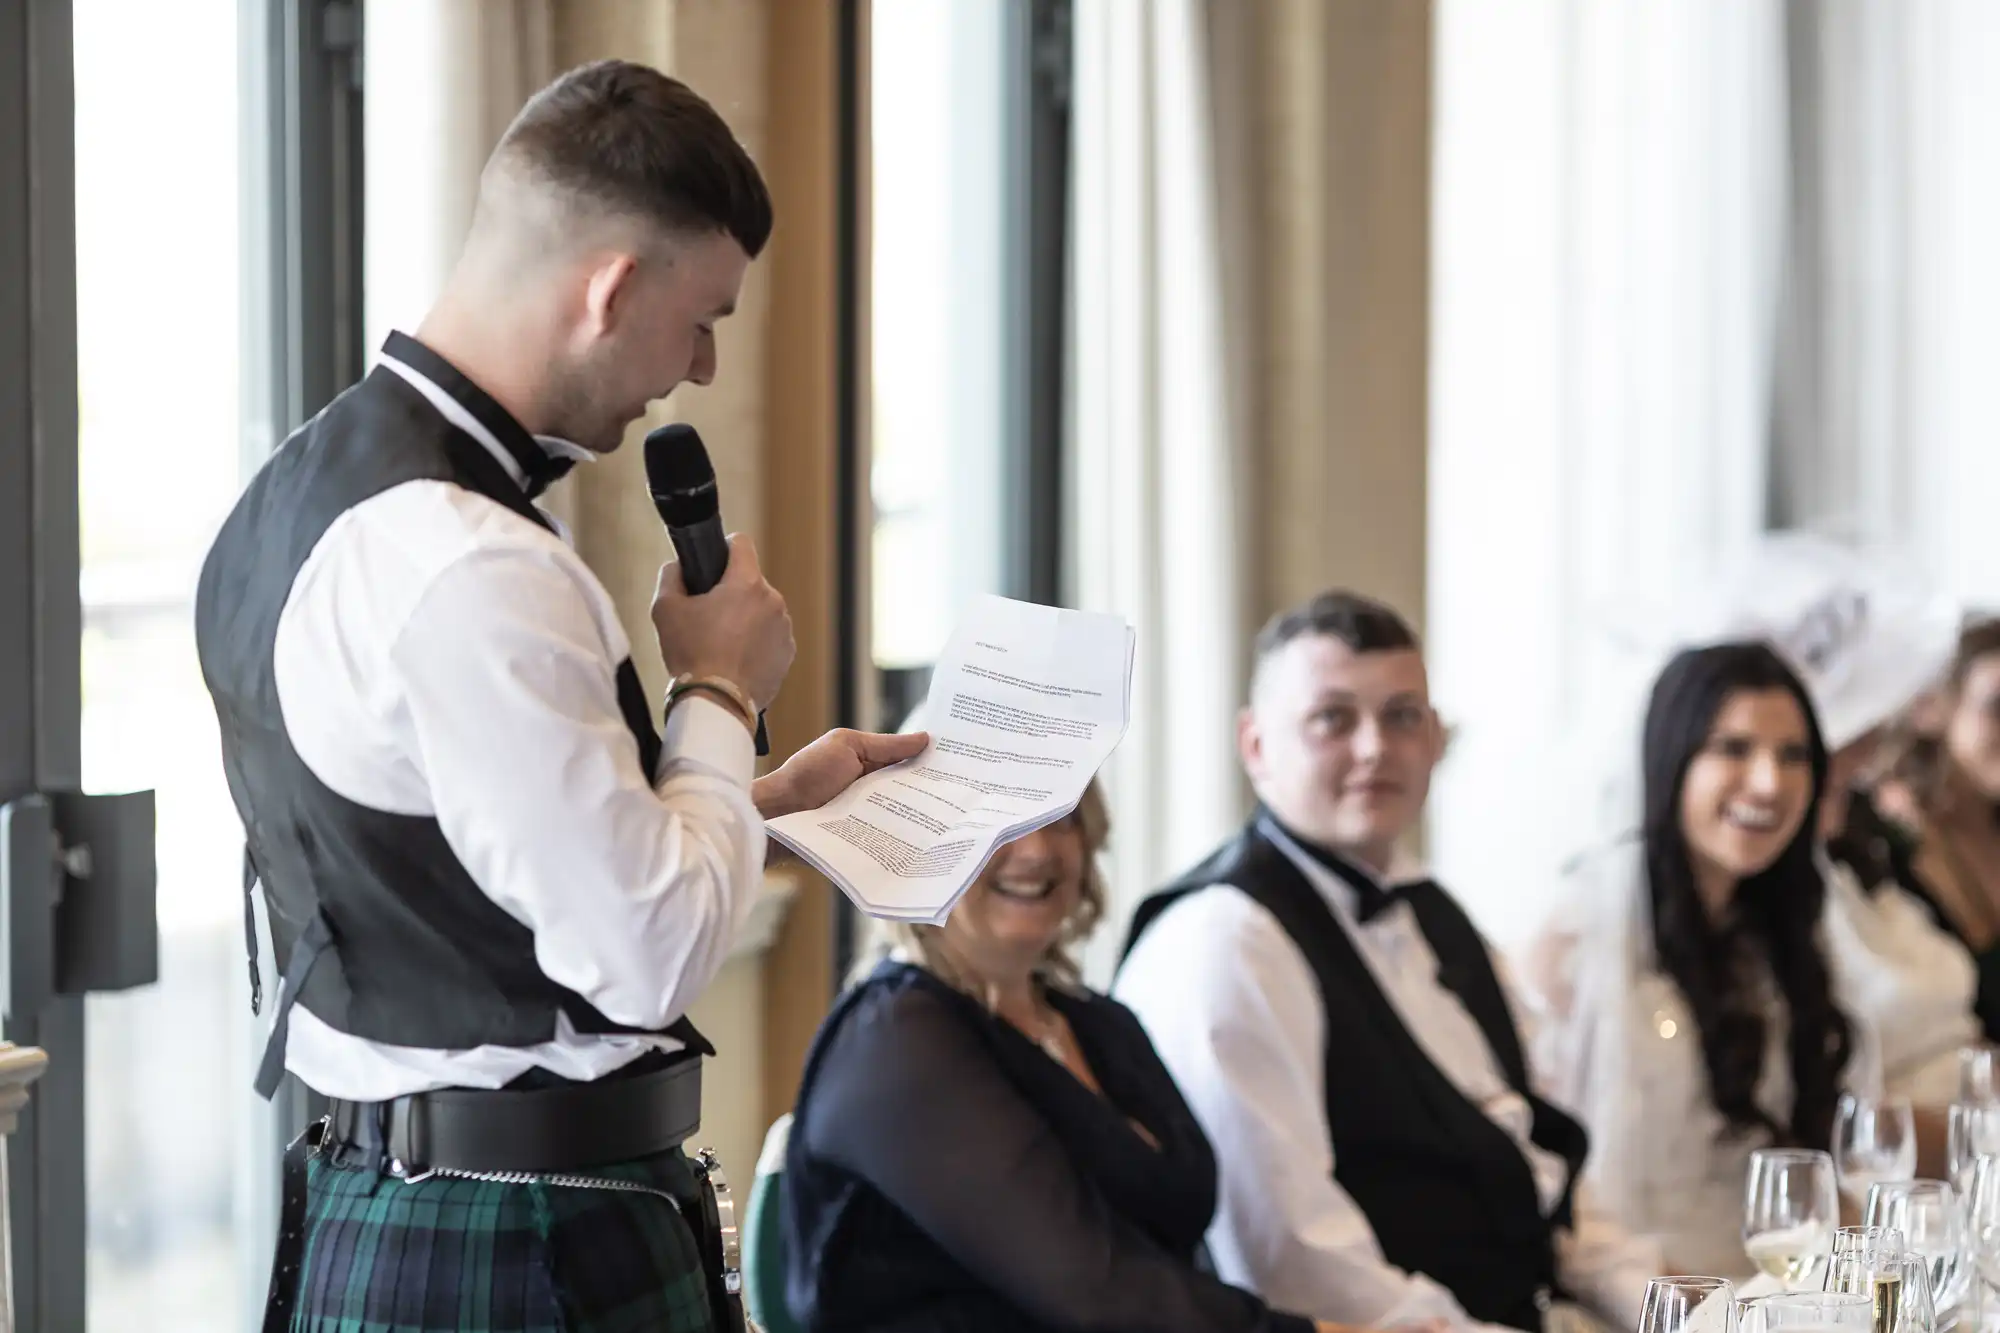 Man in kilt giving a speech with a microphone at a formal event, holding papers, with an audience of smiling people seated at a table in the background.